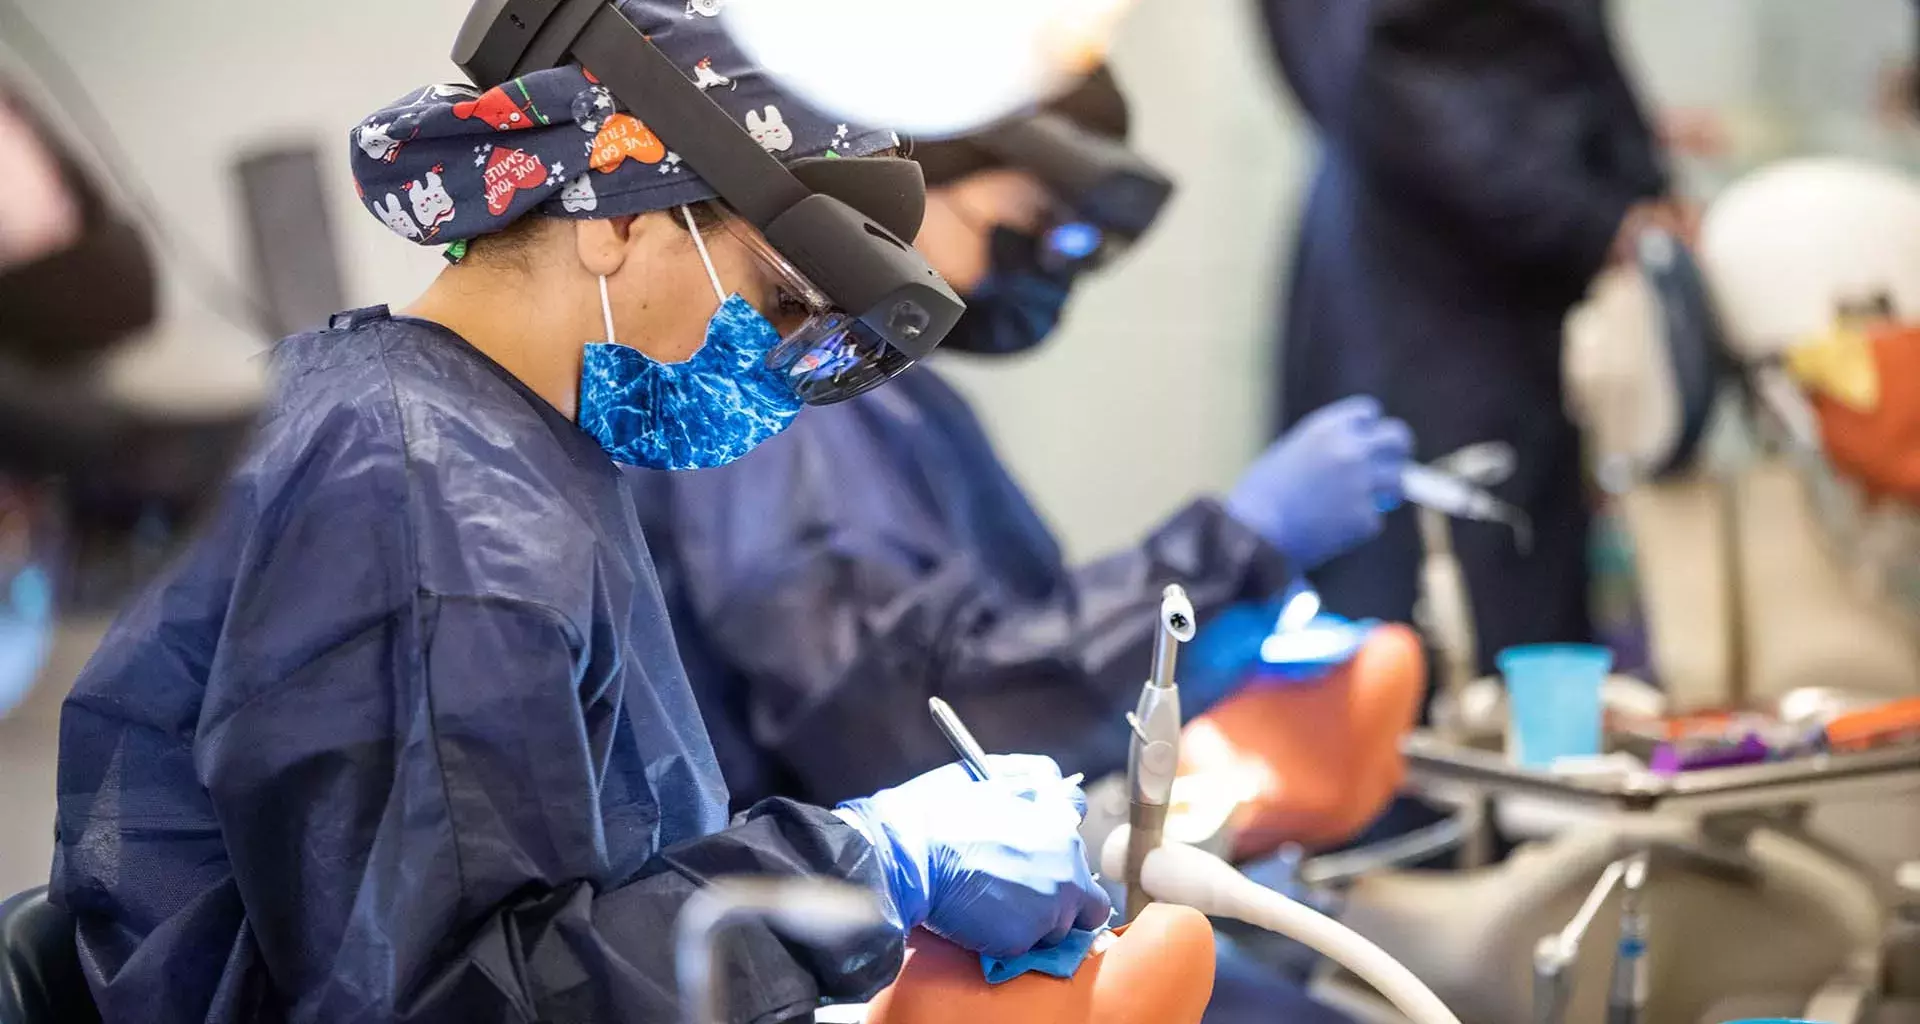 Tec dentistry: Learning with a simulator and mixed reality goggles